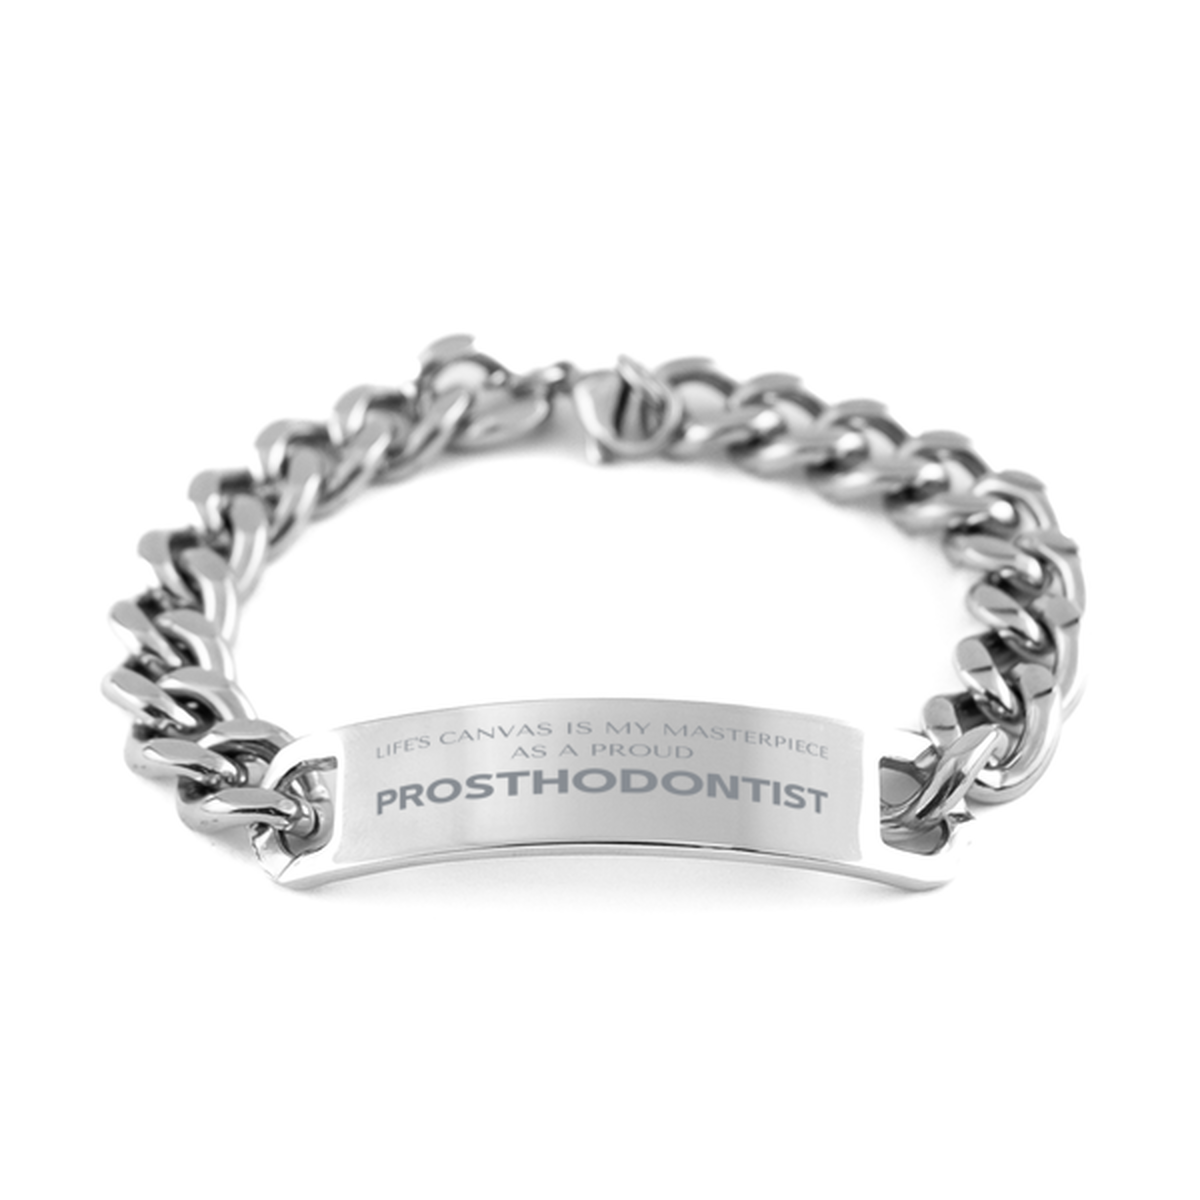 Proud Prosthodontist Gifts, Life's canvas is my masterpiece, Epic Birthday Christmas Unique Cuban Chain Stainless Steel Bracelet For Prosthodontist, Coworkers, Men, Women, Friends